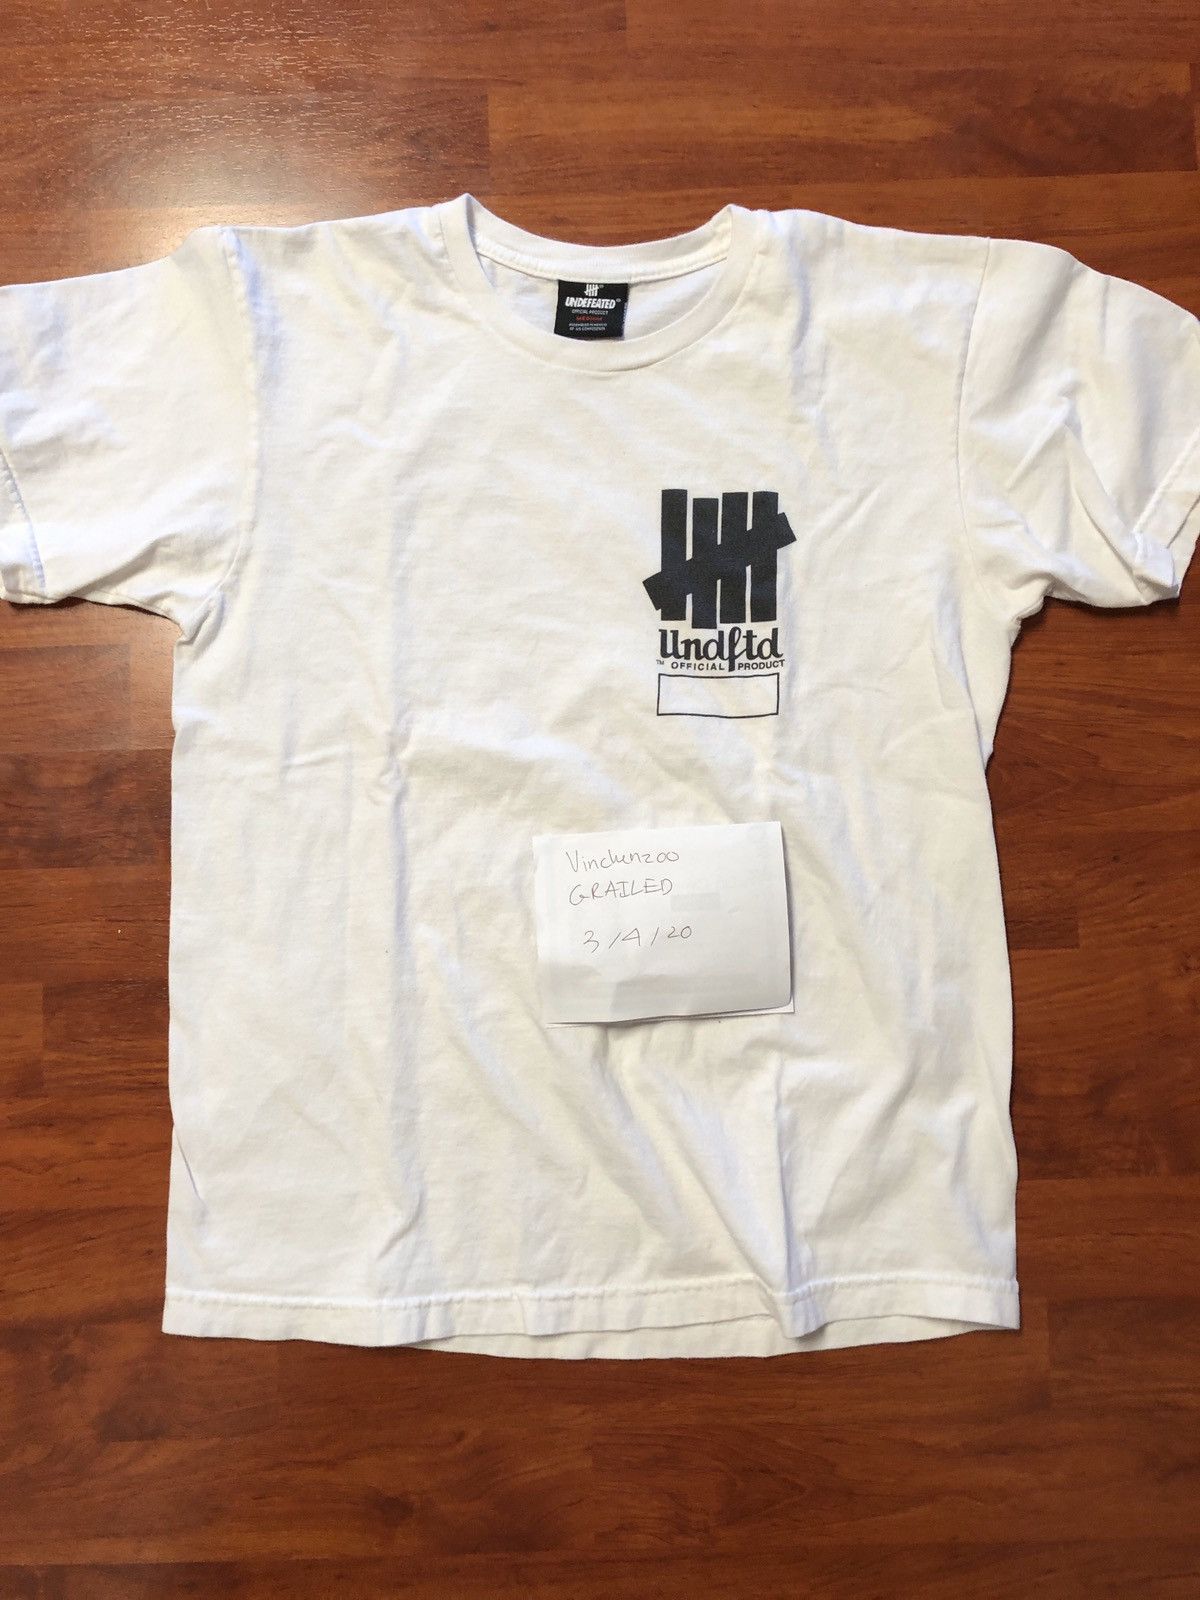 Undefeated Undefeated name tag tee shirt | Grailed